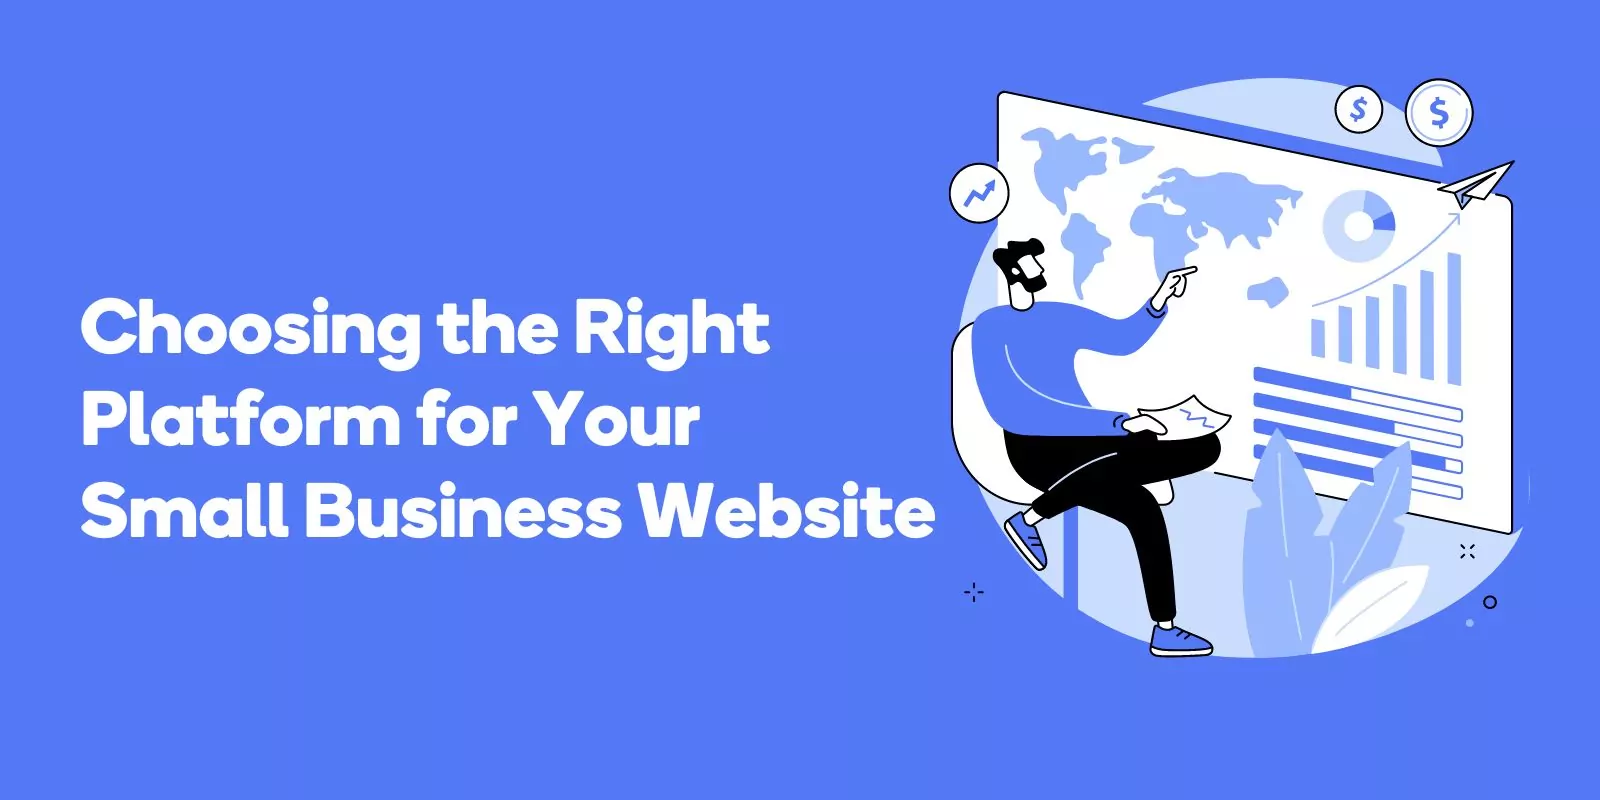 Choosing the Right Platform for Your Small Business Website